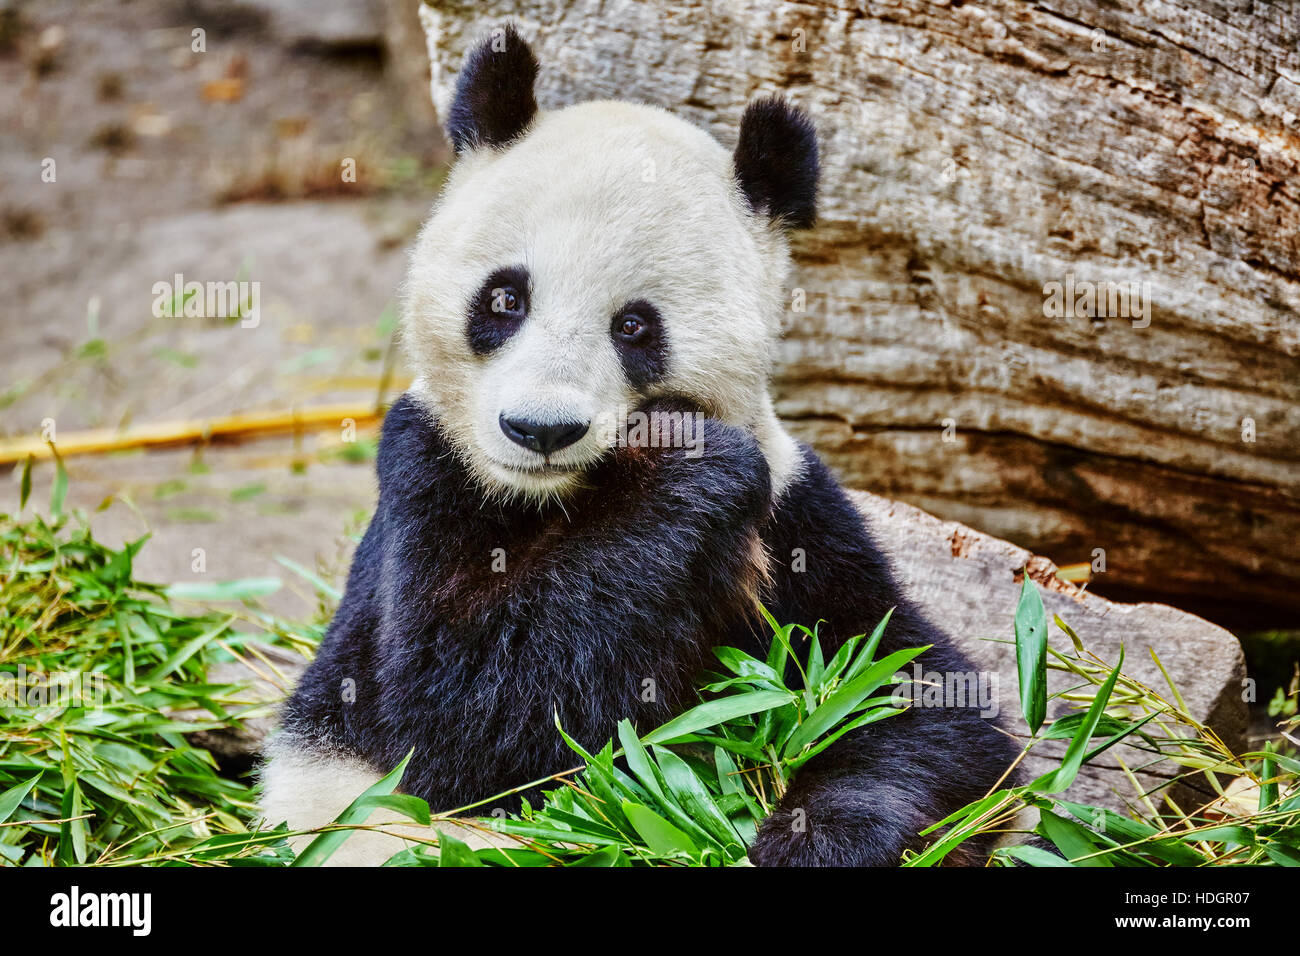 Cute bear panda actively chew a green bamboo sprout. Stock Photo